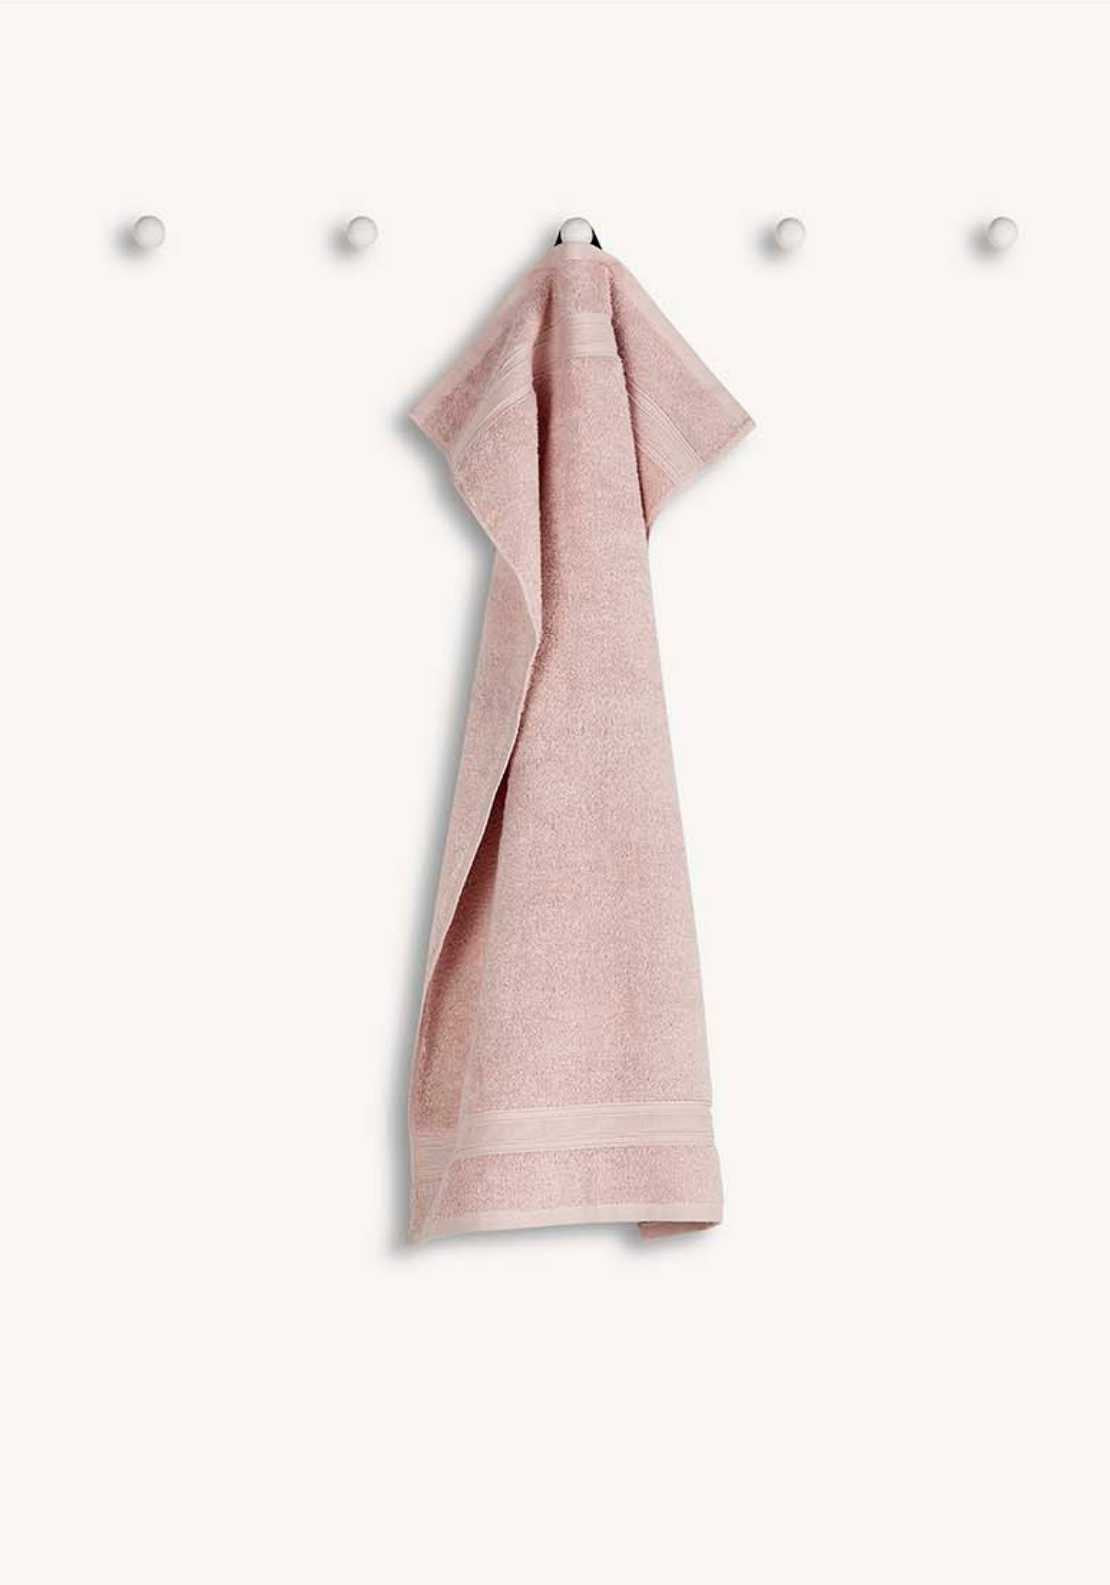 Christy Serene Hand Towel - Dusty Pink 2 Shaws Department Stores